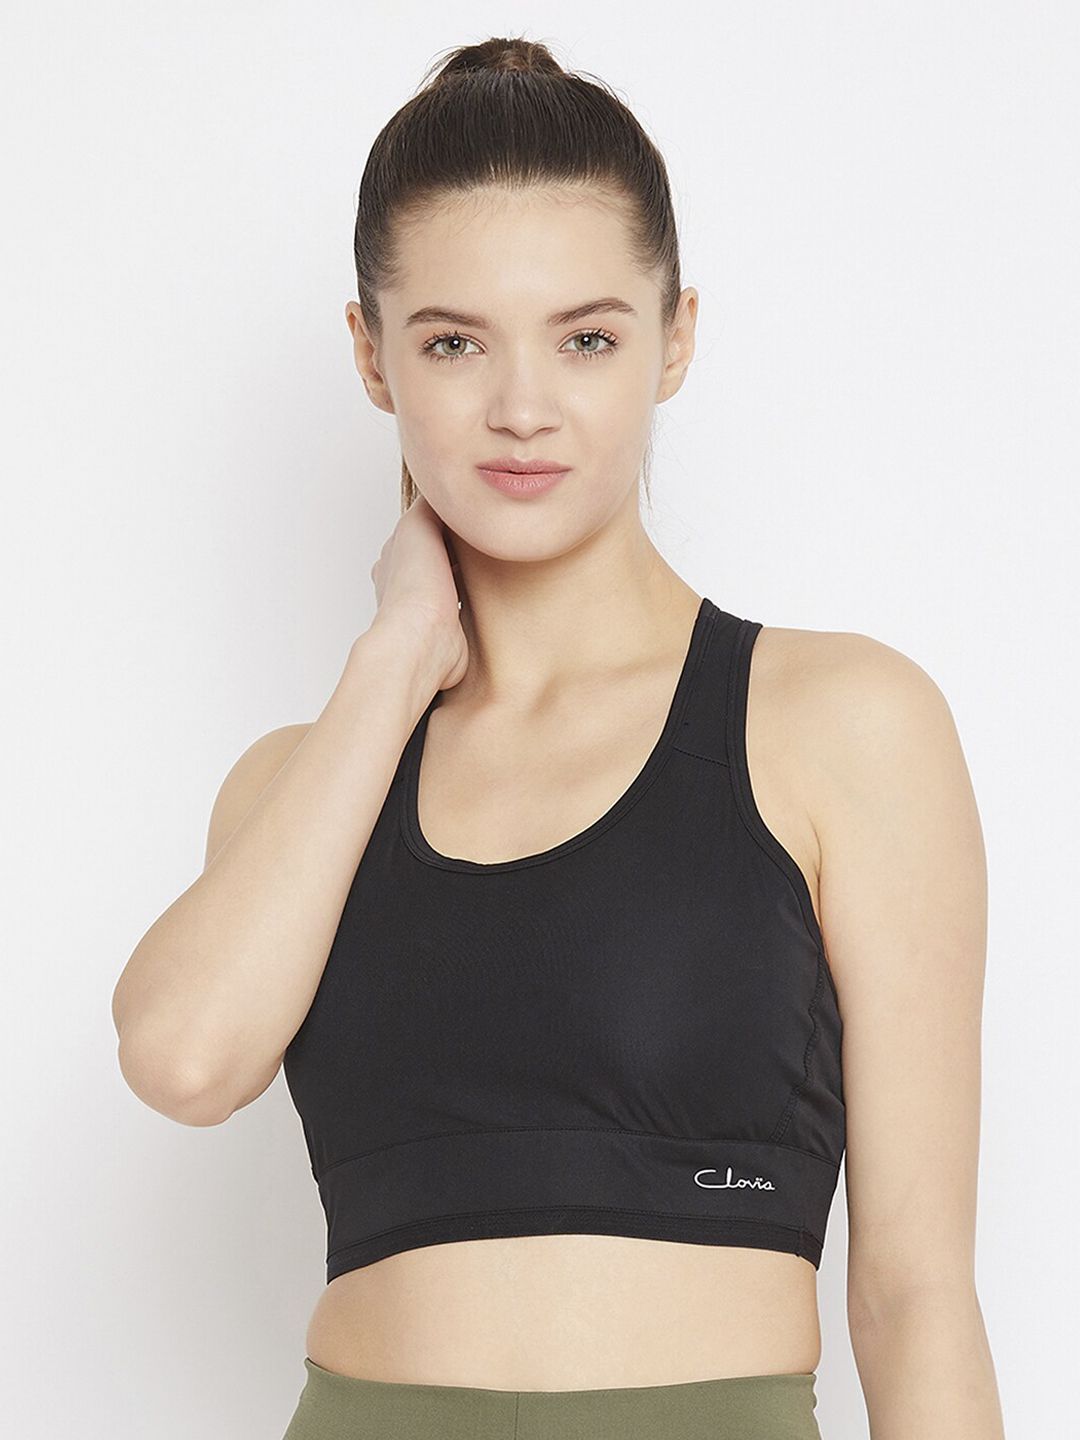 Clovia Black Solid Non-Wired Lightly Padded Workout Bra BR2158P13XXL Price in India